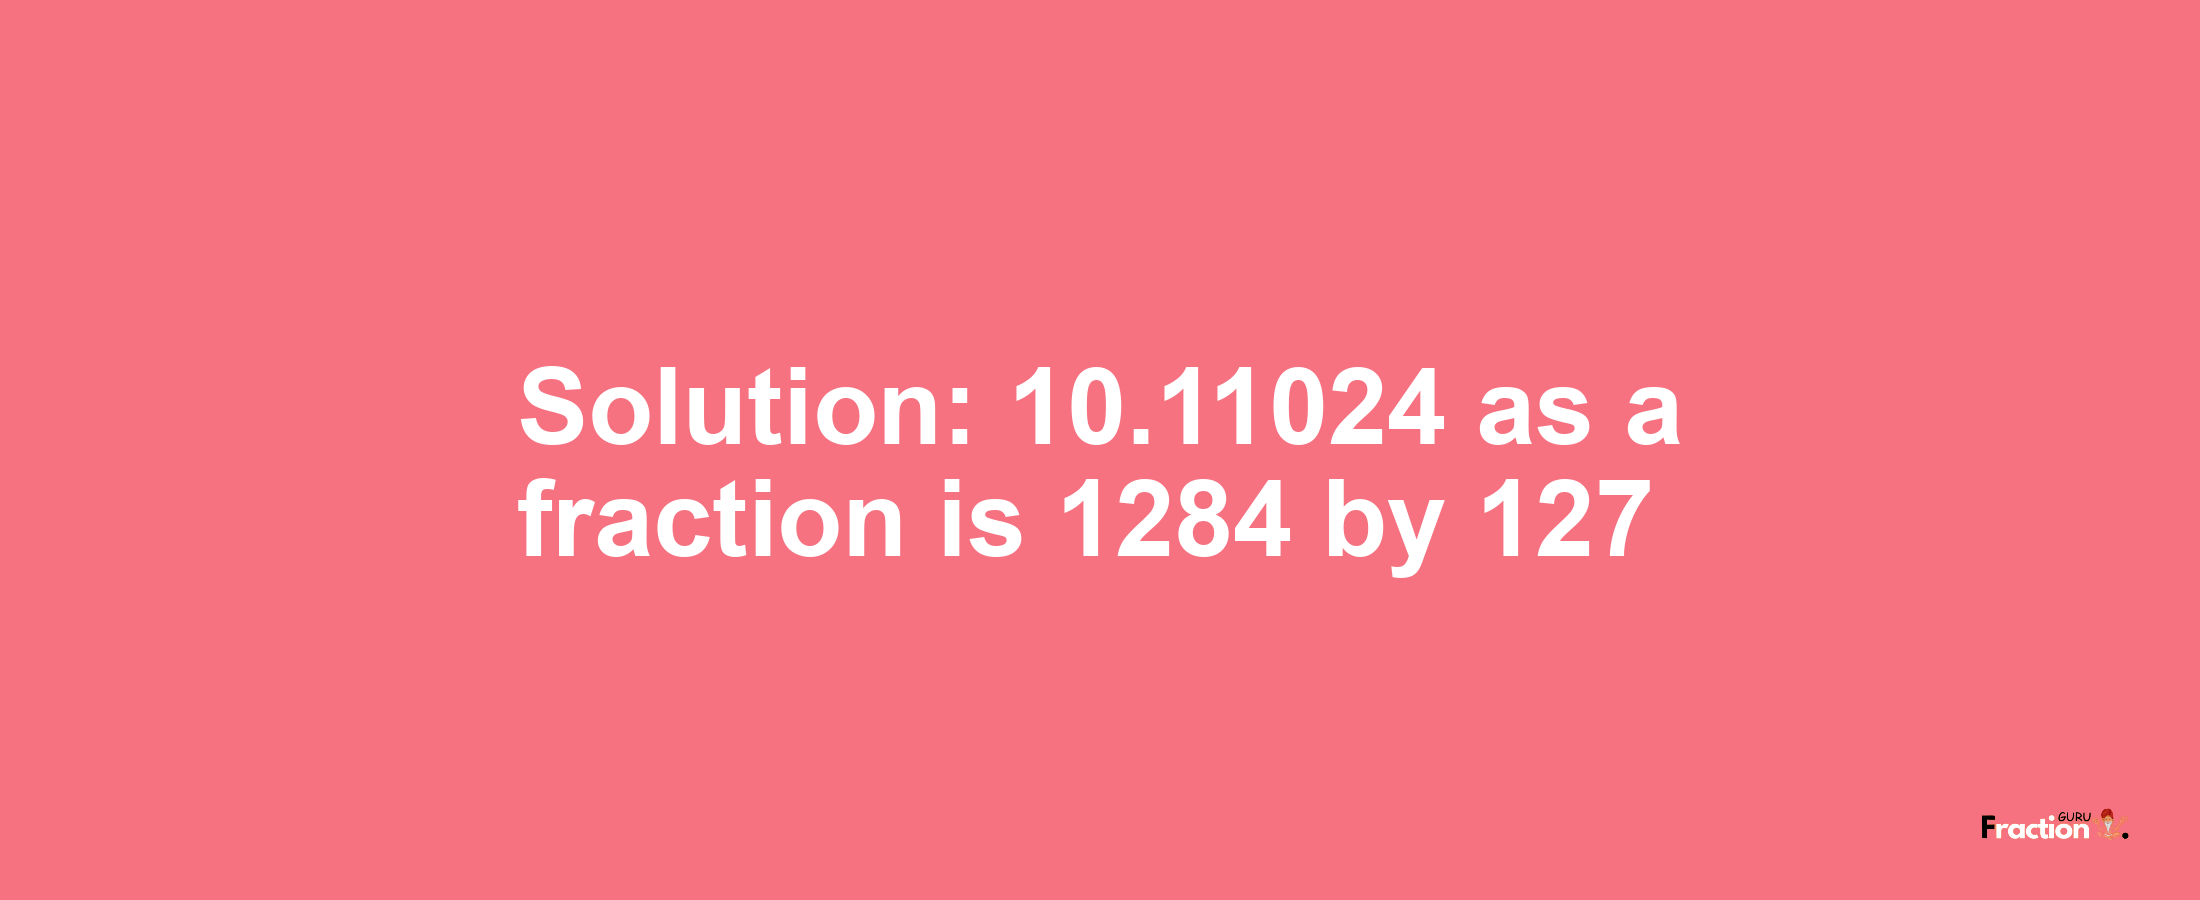 Solution:10.11024 as a fraction is 1284/127